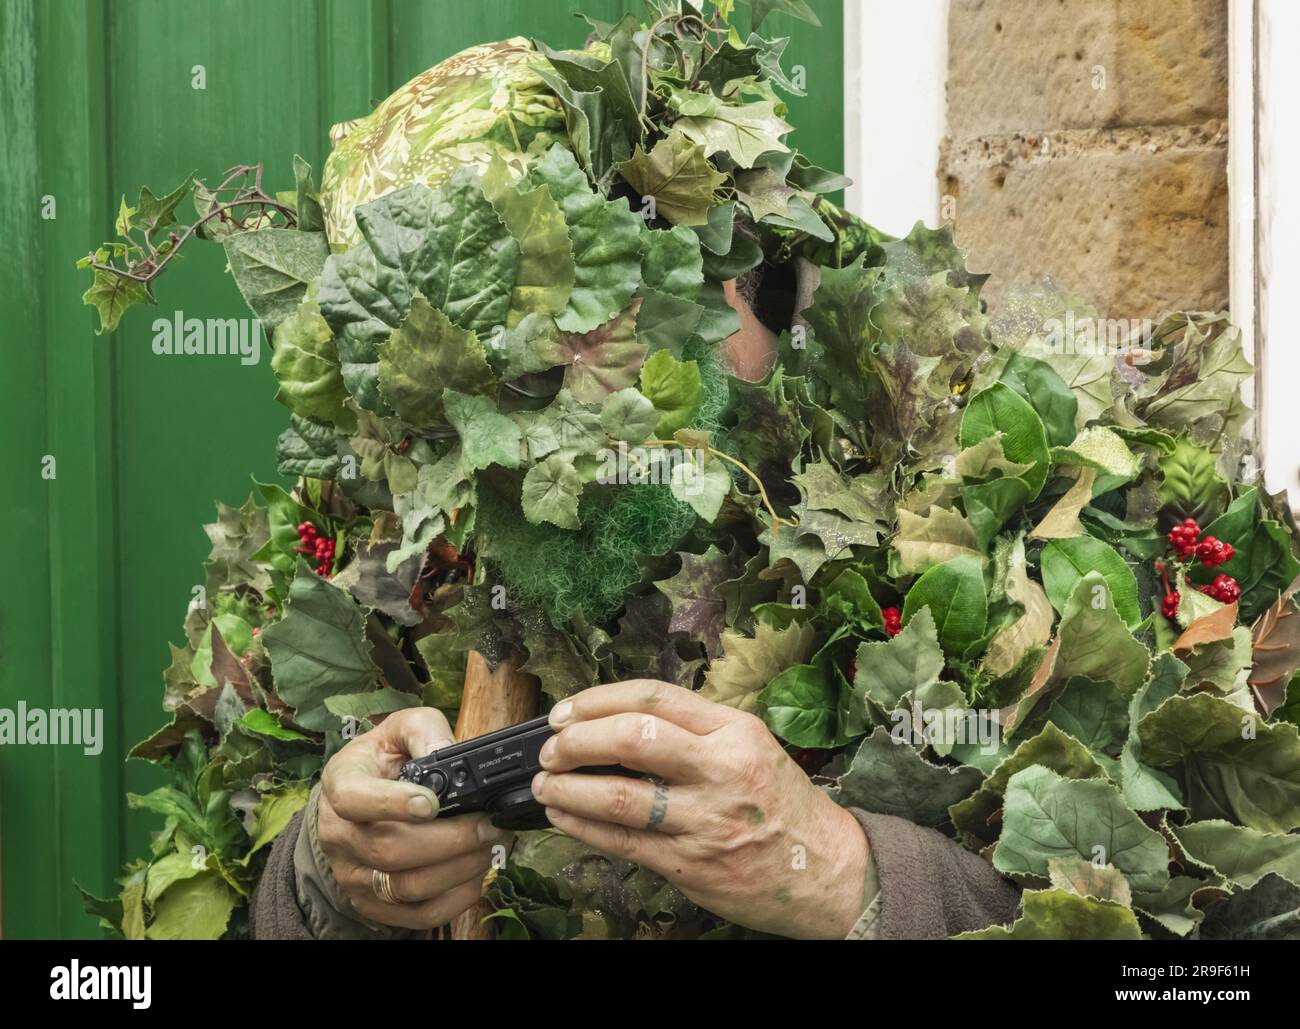 England, Sussex, East Sussex, Hastings, The Old Town,  Participant in The Annual Jack in The Green Festival Stock Photo